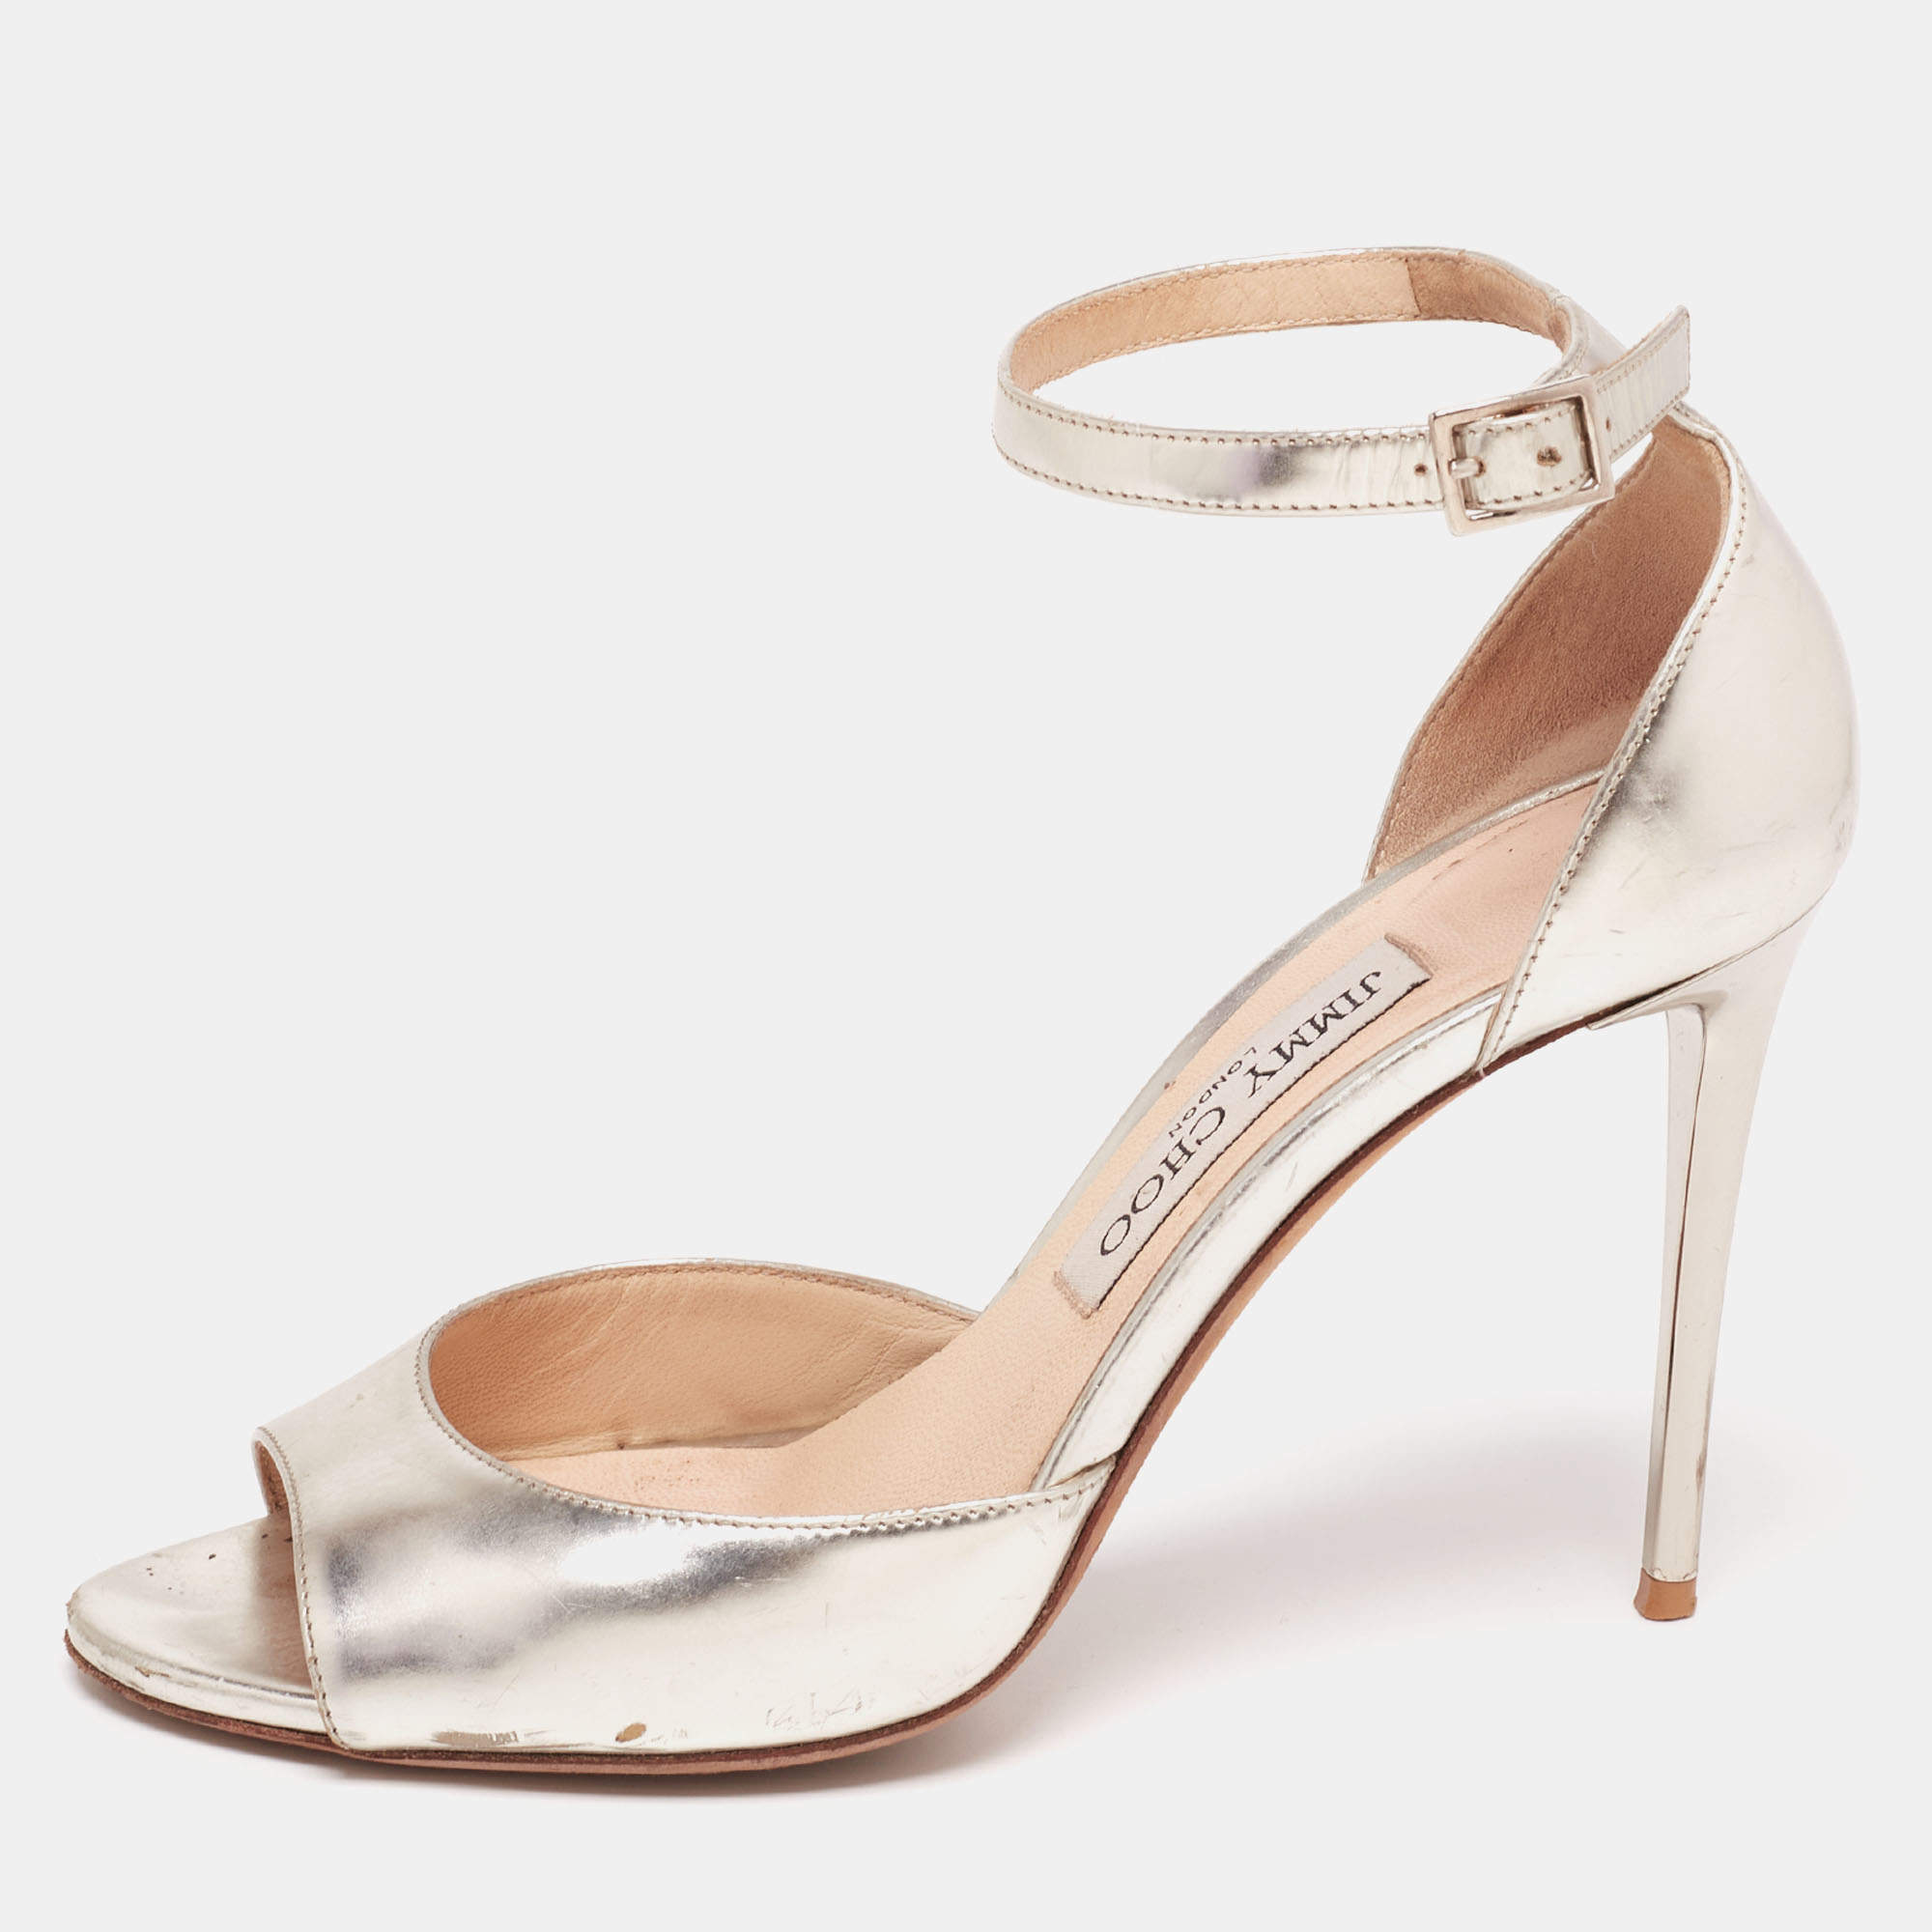 Jimmy Choo Light Gold Leather Ankle-Strap Sandals Size 37